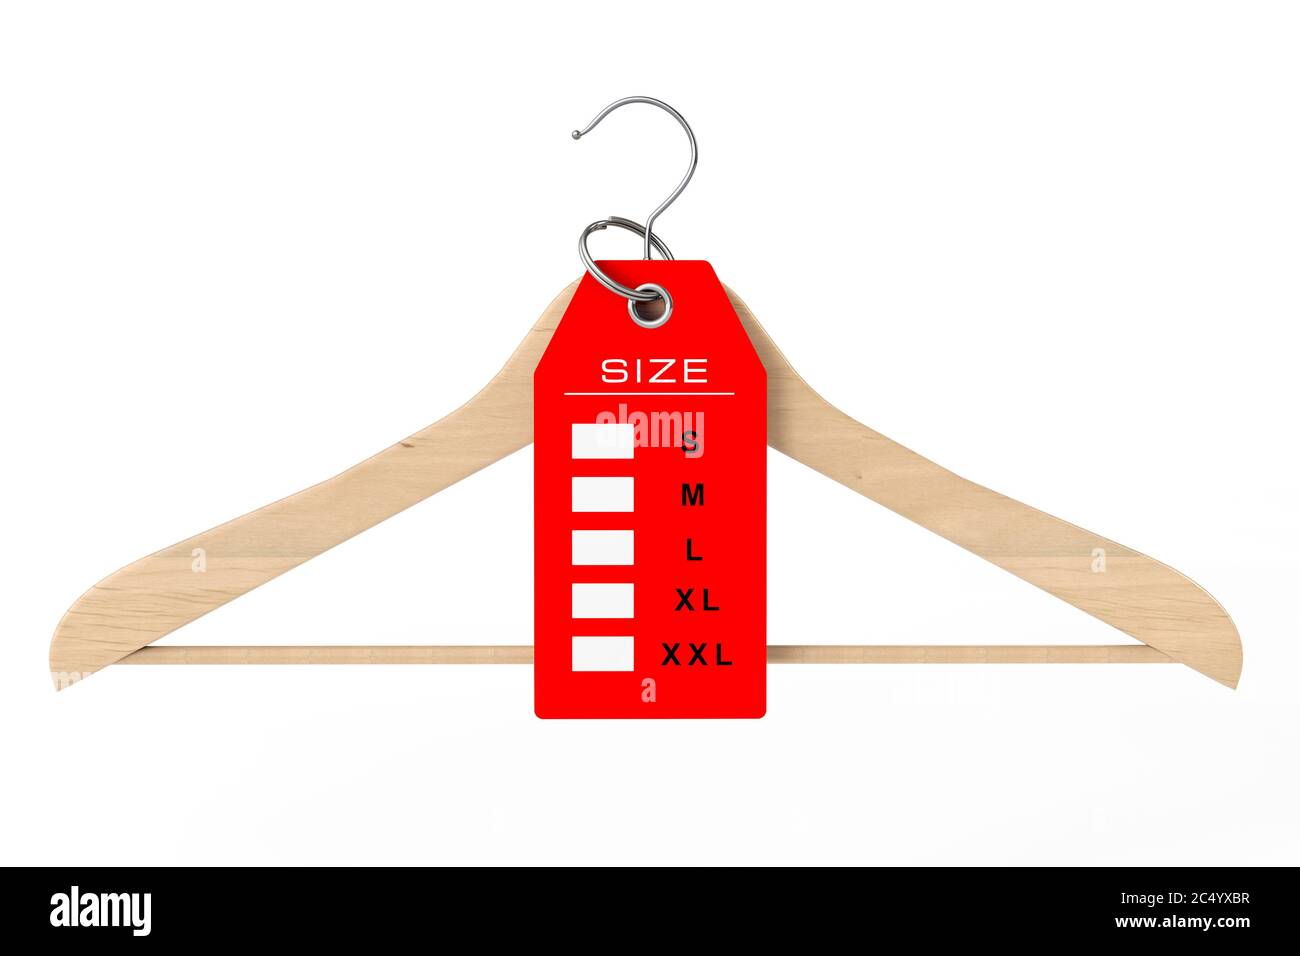 https://c8.alamy.com/comp/2C4YXBR/wooden-clothes-hanger-and-dress-tag-with-size-sign-on-a-white-background-3d-rendering-2C4YXBR.jpg